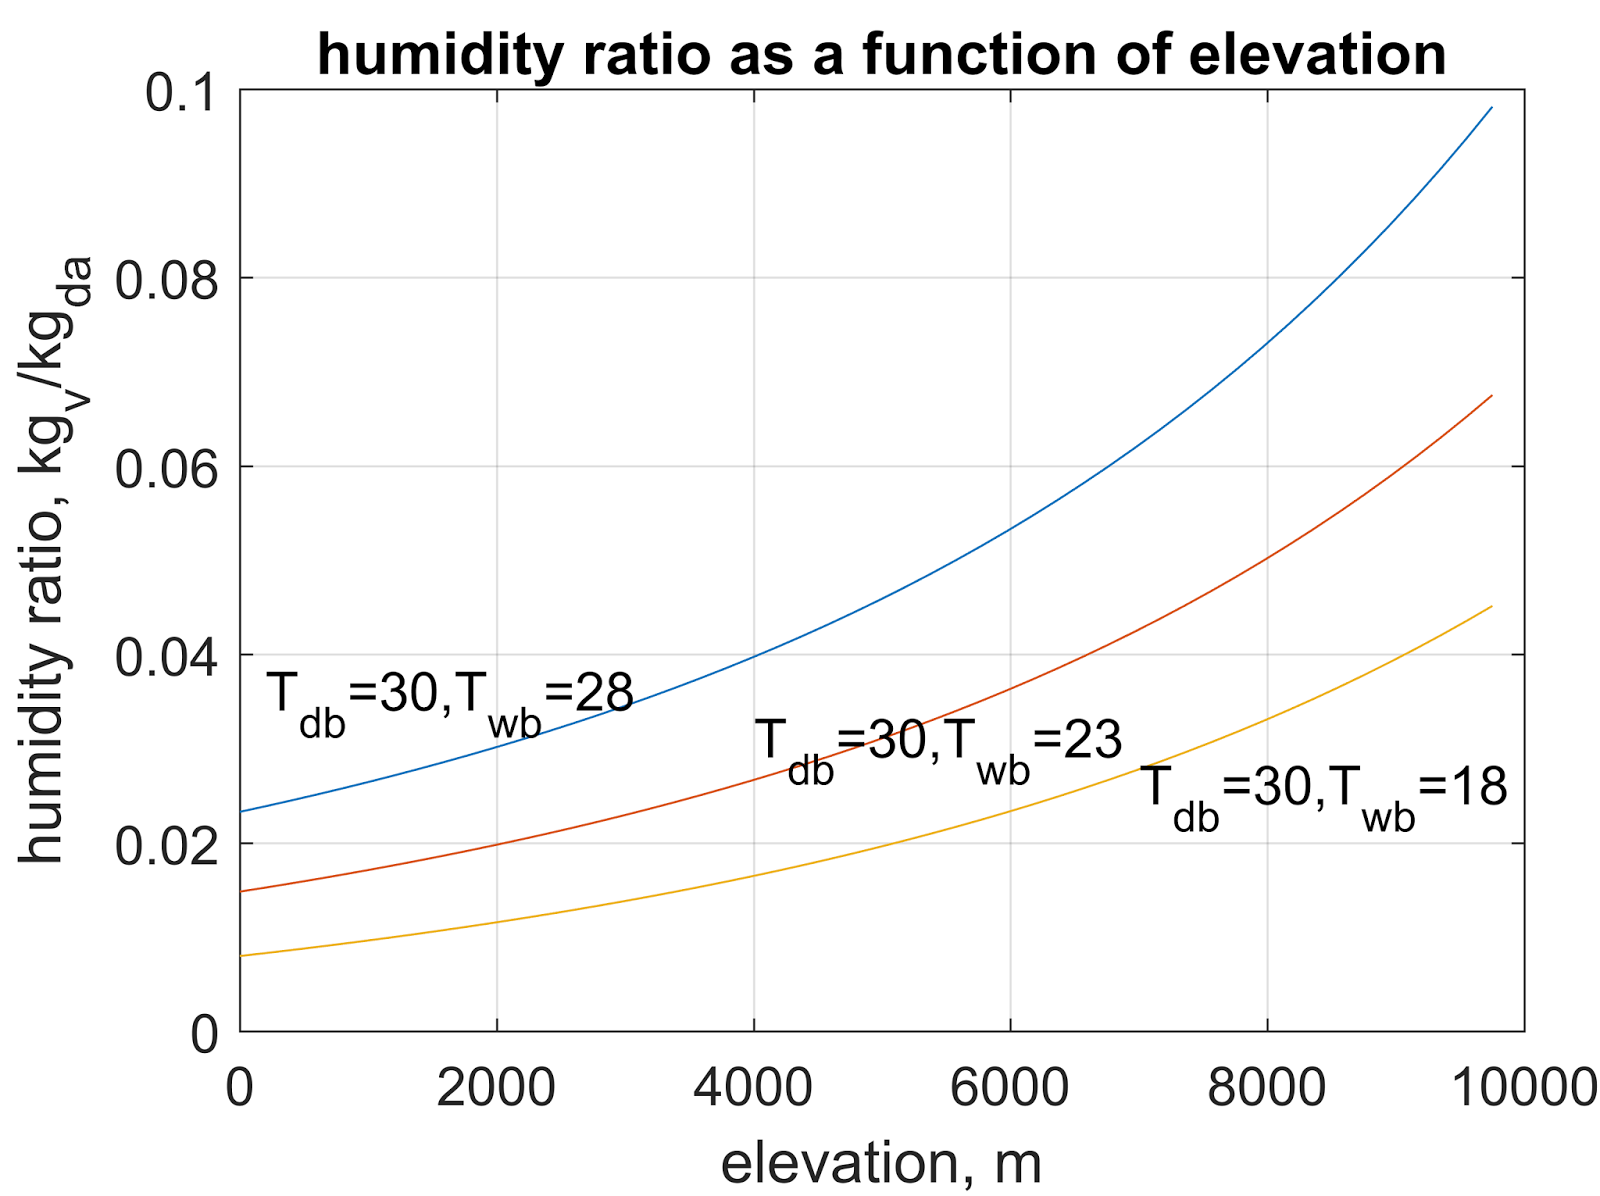 Drying  The Effect of Temperature on Relative Humidity